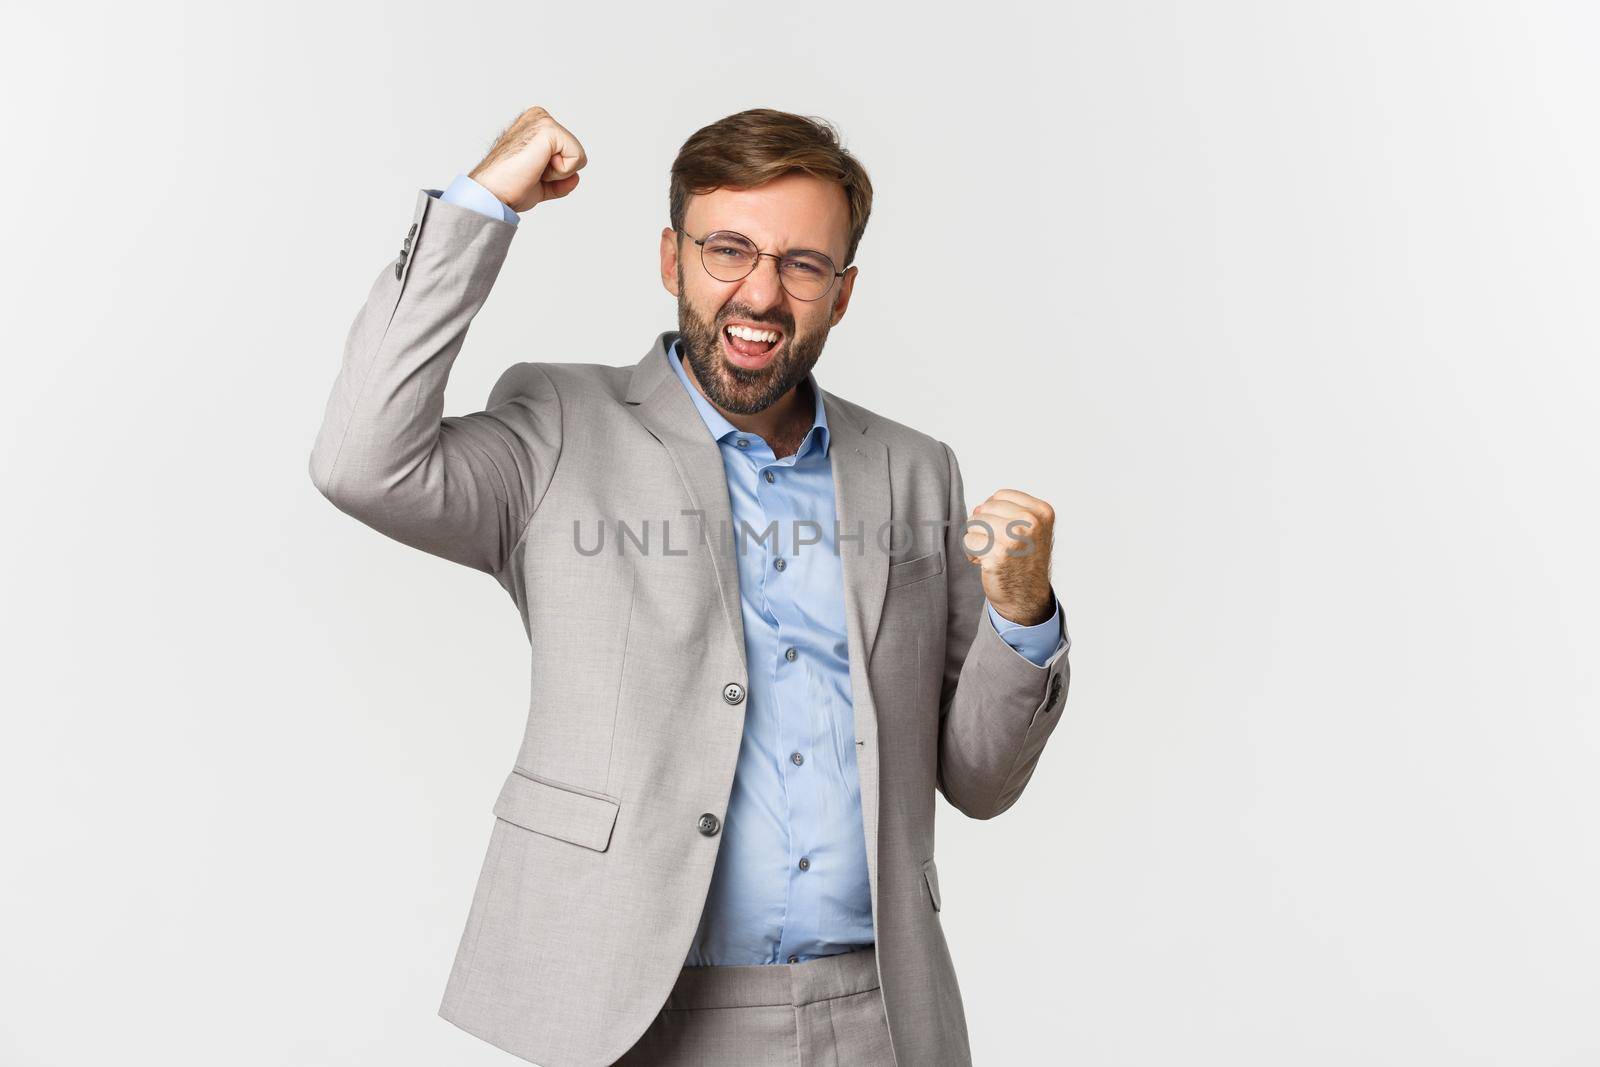 Portrait of successful bearded businessman in grey suit, achieve goal and triumphing, making fist pump gesture and saying yes with confident look, standing over white background.